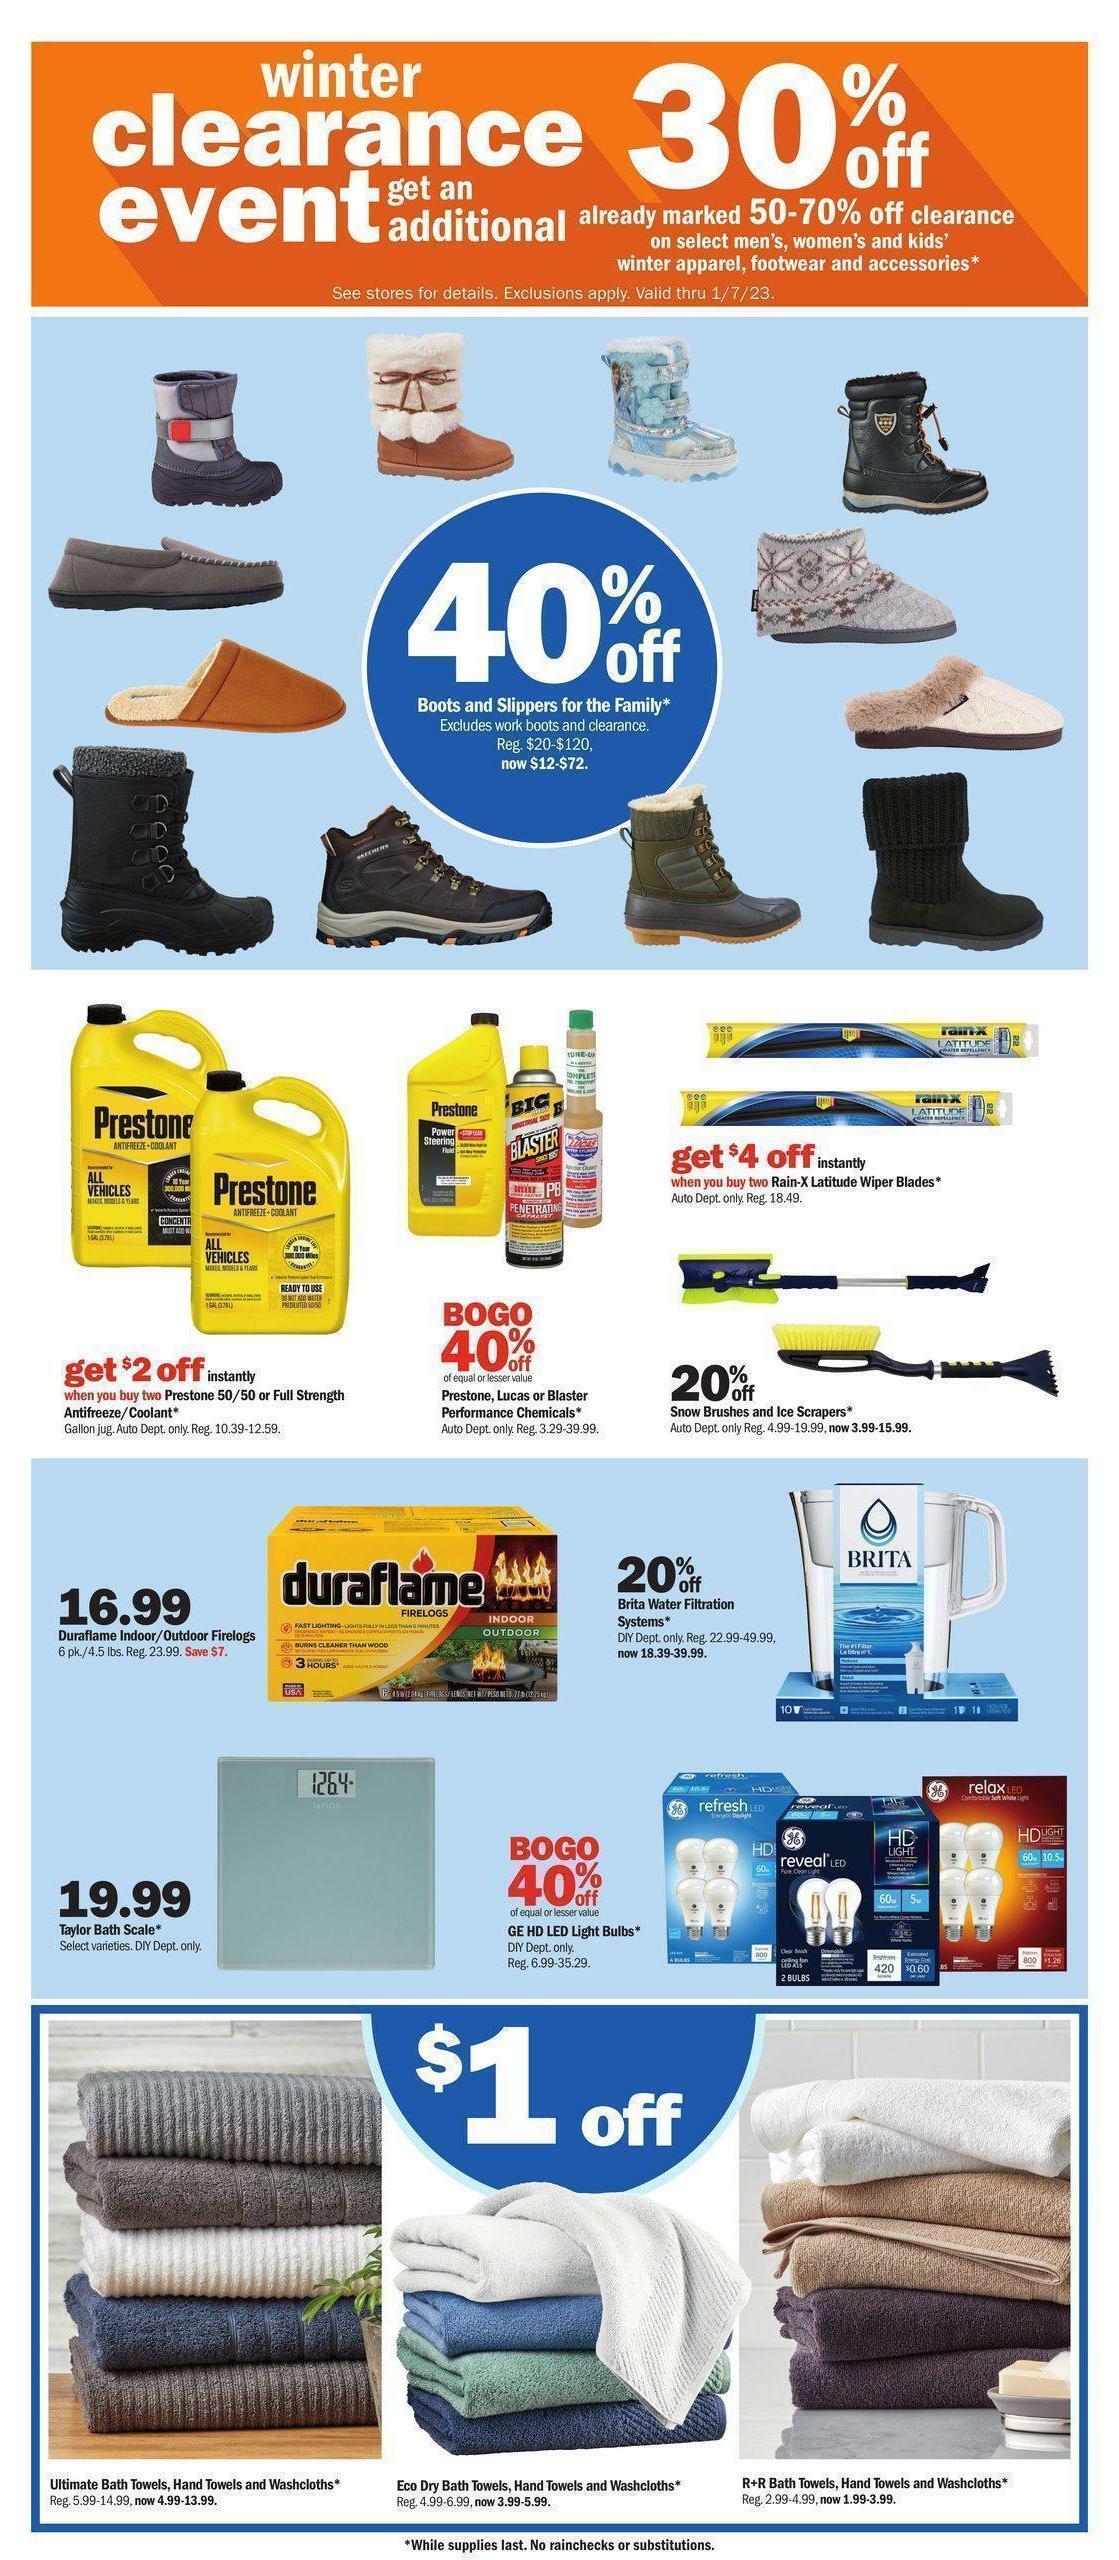 Meijer Weekly Ad from January 1